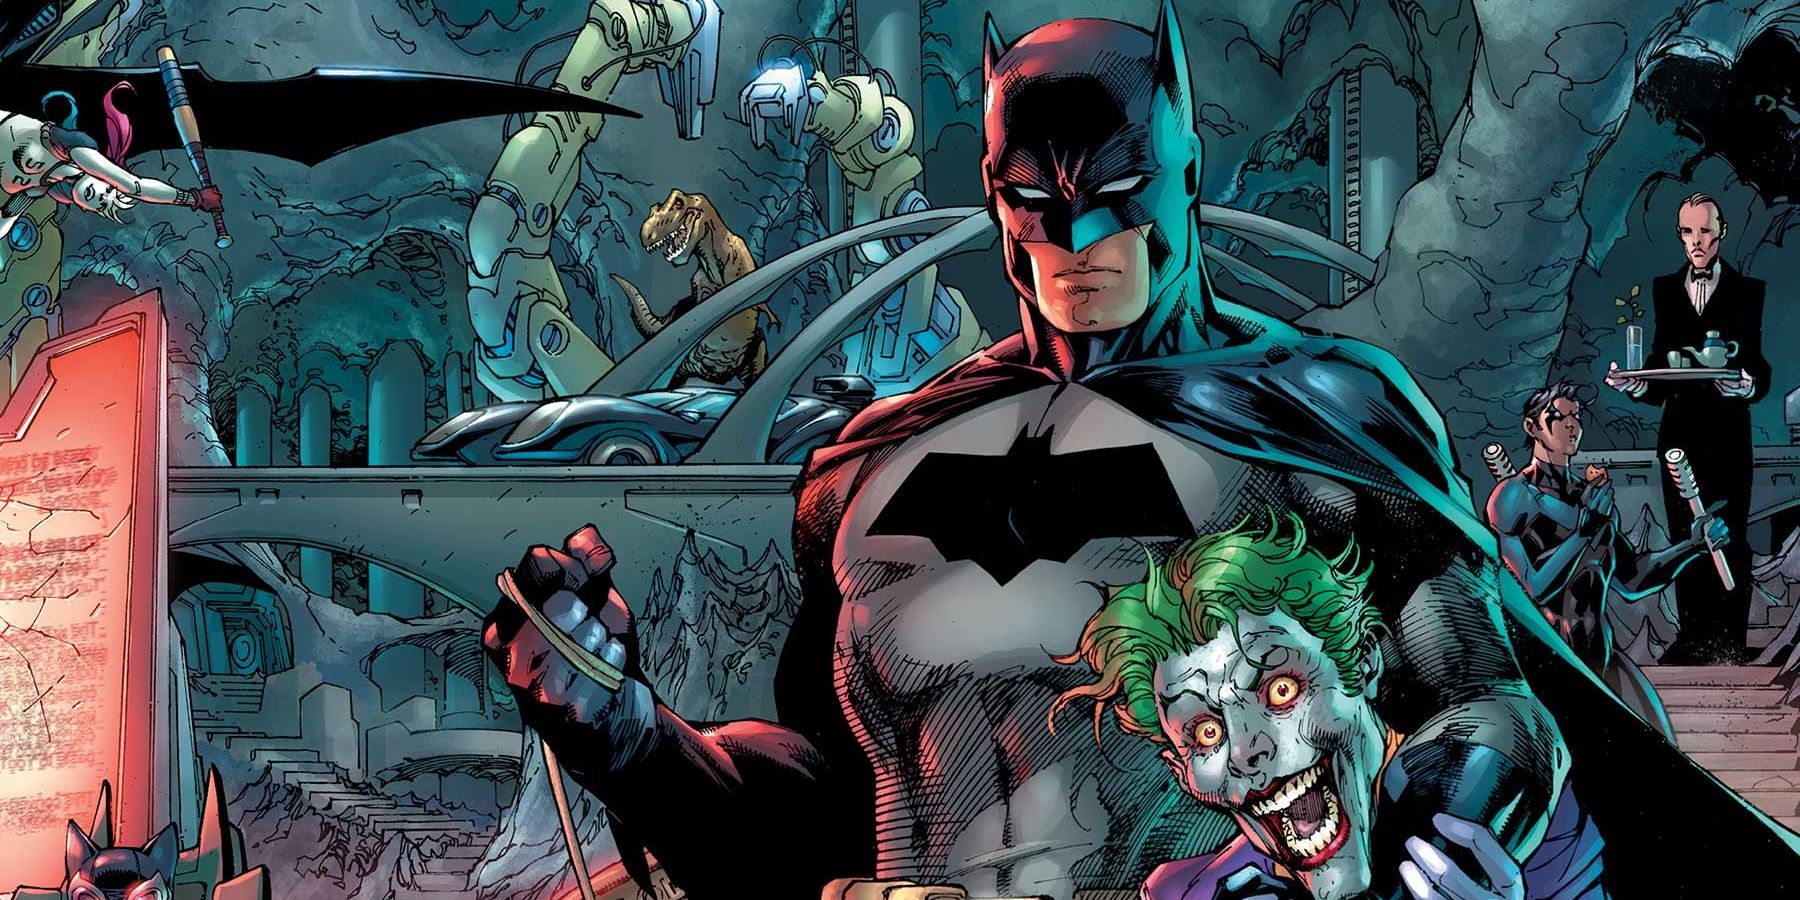 Cover art for Detective Comics #1000, illustrated by Jim Lee and Scott Williams